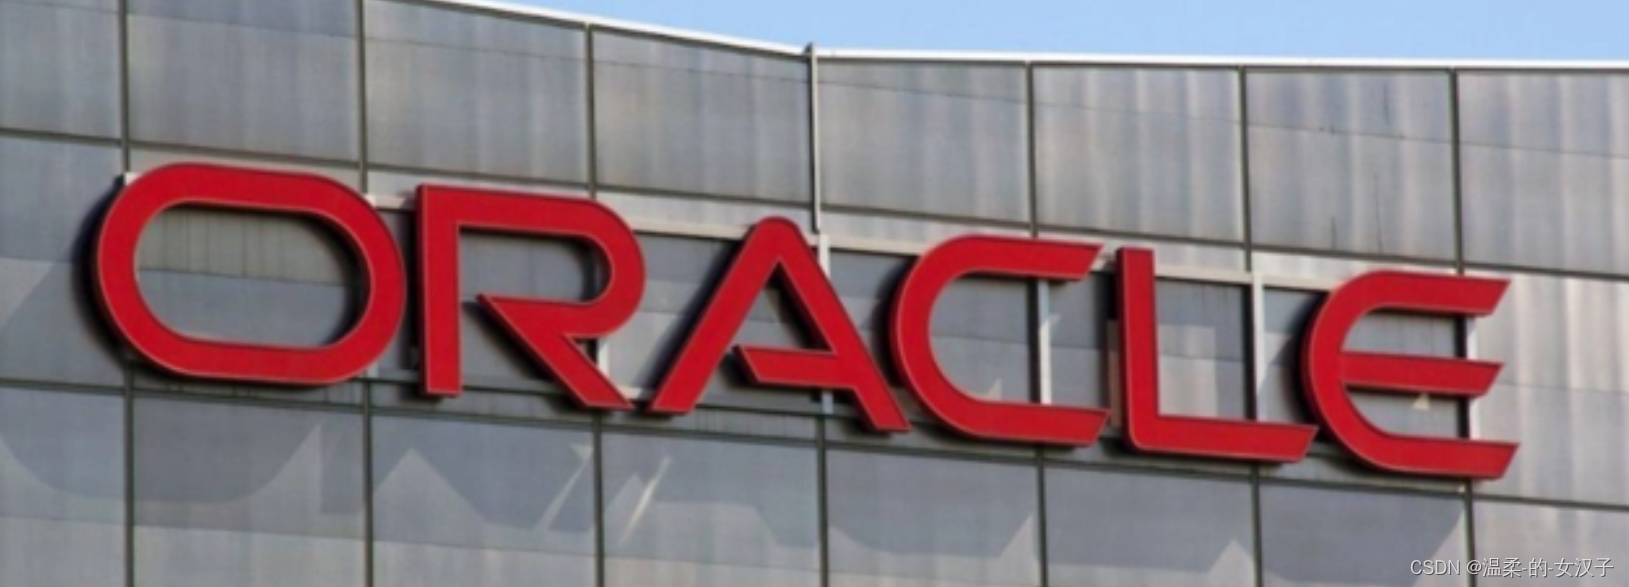 oracle <span style='color:red;'>数据库</span>找到UDUMP<span style='color:red;'>的</span>文件<span style='color:red;'>名称</span>